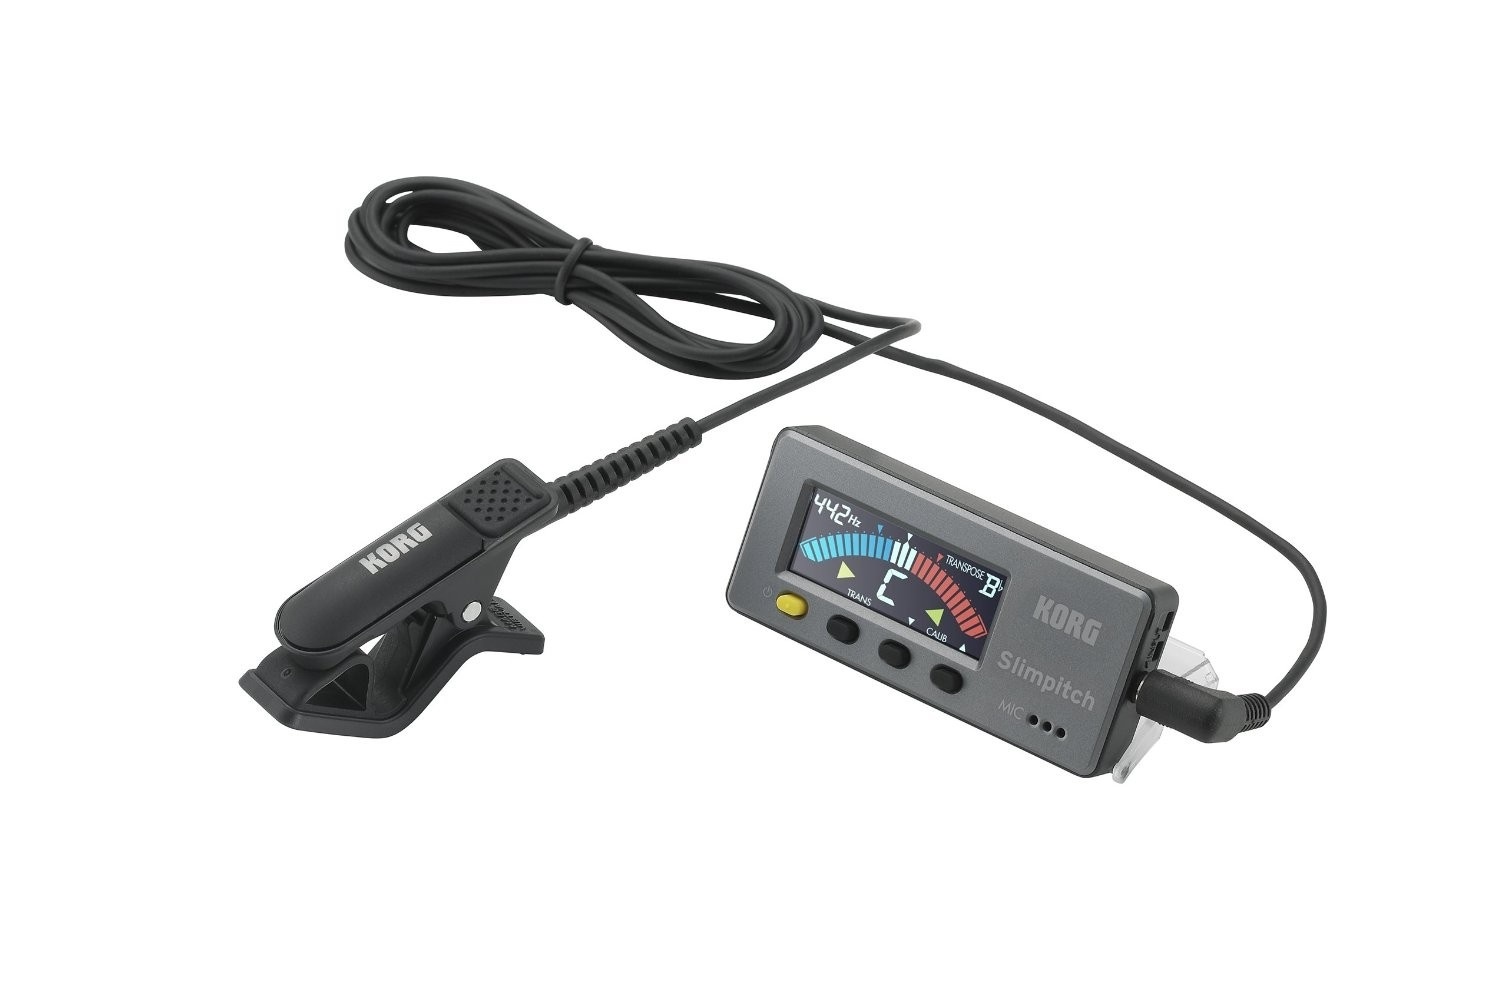 Korg Slimpitch Chromatic Tuner with Contact Mic (Black)